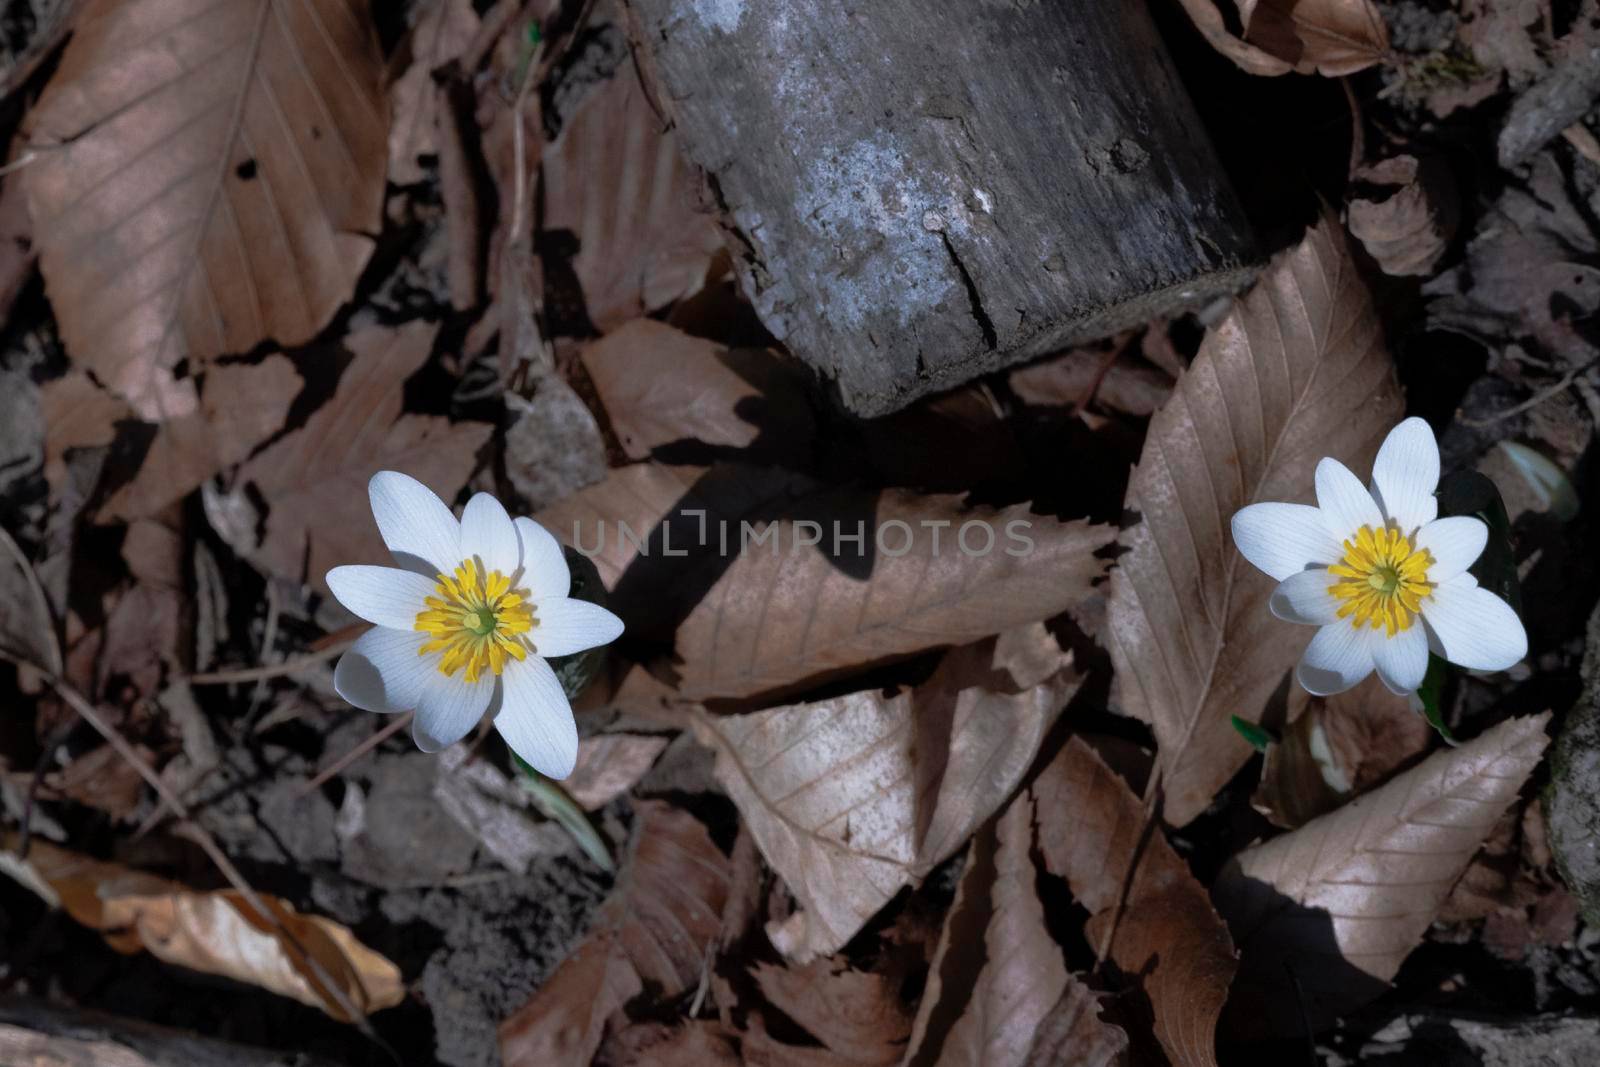 As soon as the snow melted, and already the first forest flowers made their way through last year's foliage